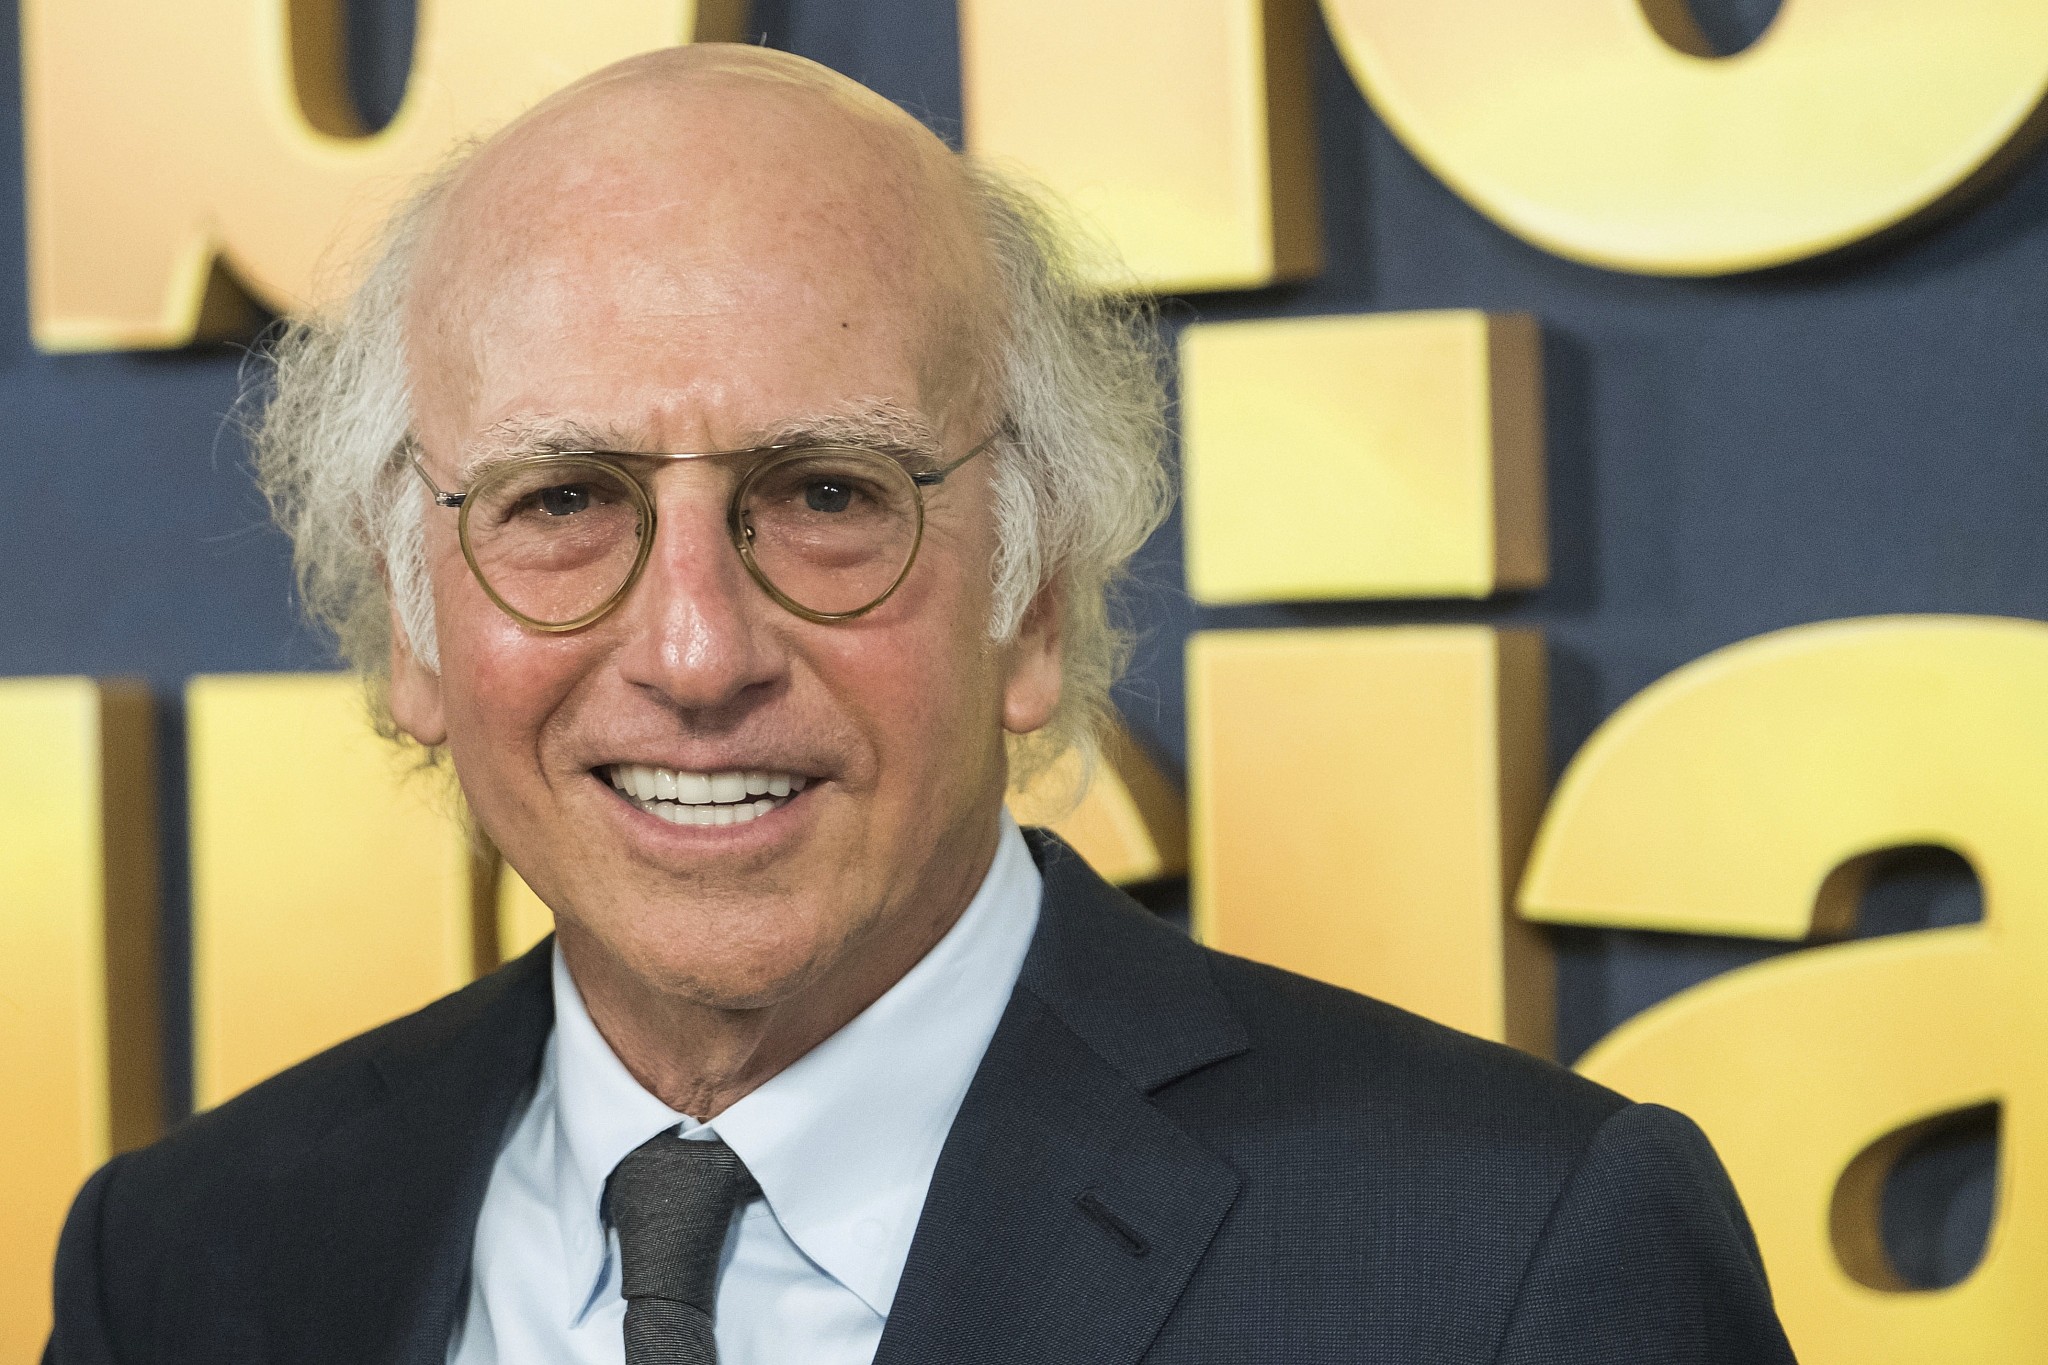 Larry David criticized for 'SNL' Holocaust jokes The Times of Israel